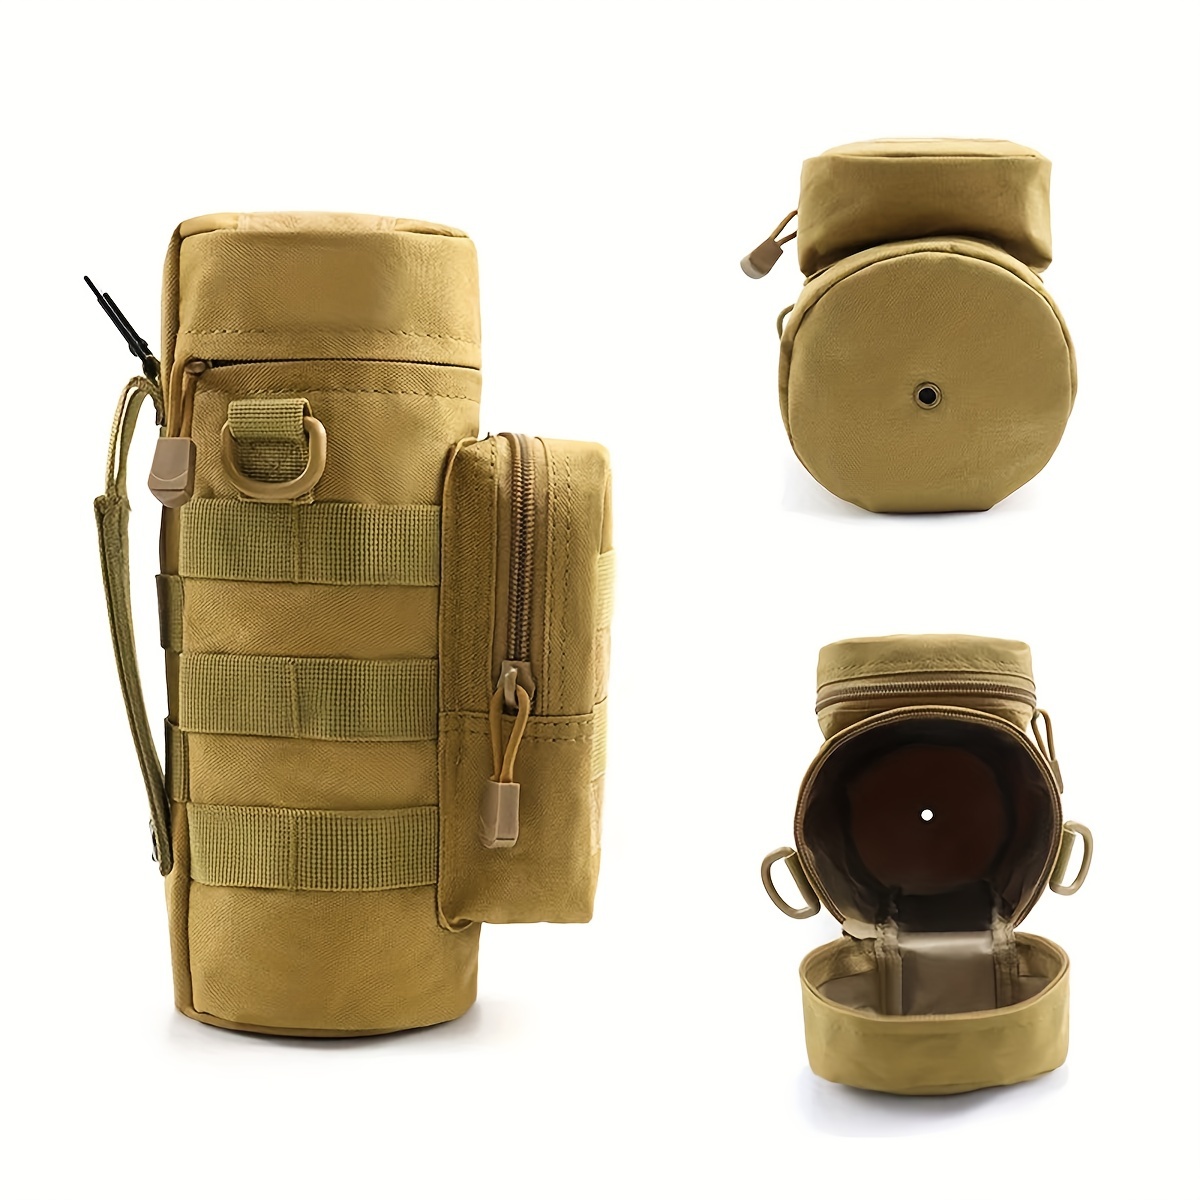 Tactical Water Bottle Holder Cup Pouch Shoulder Strap Perfect